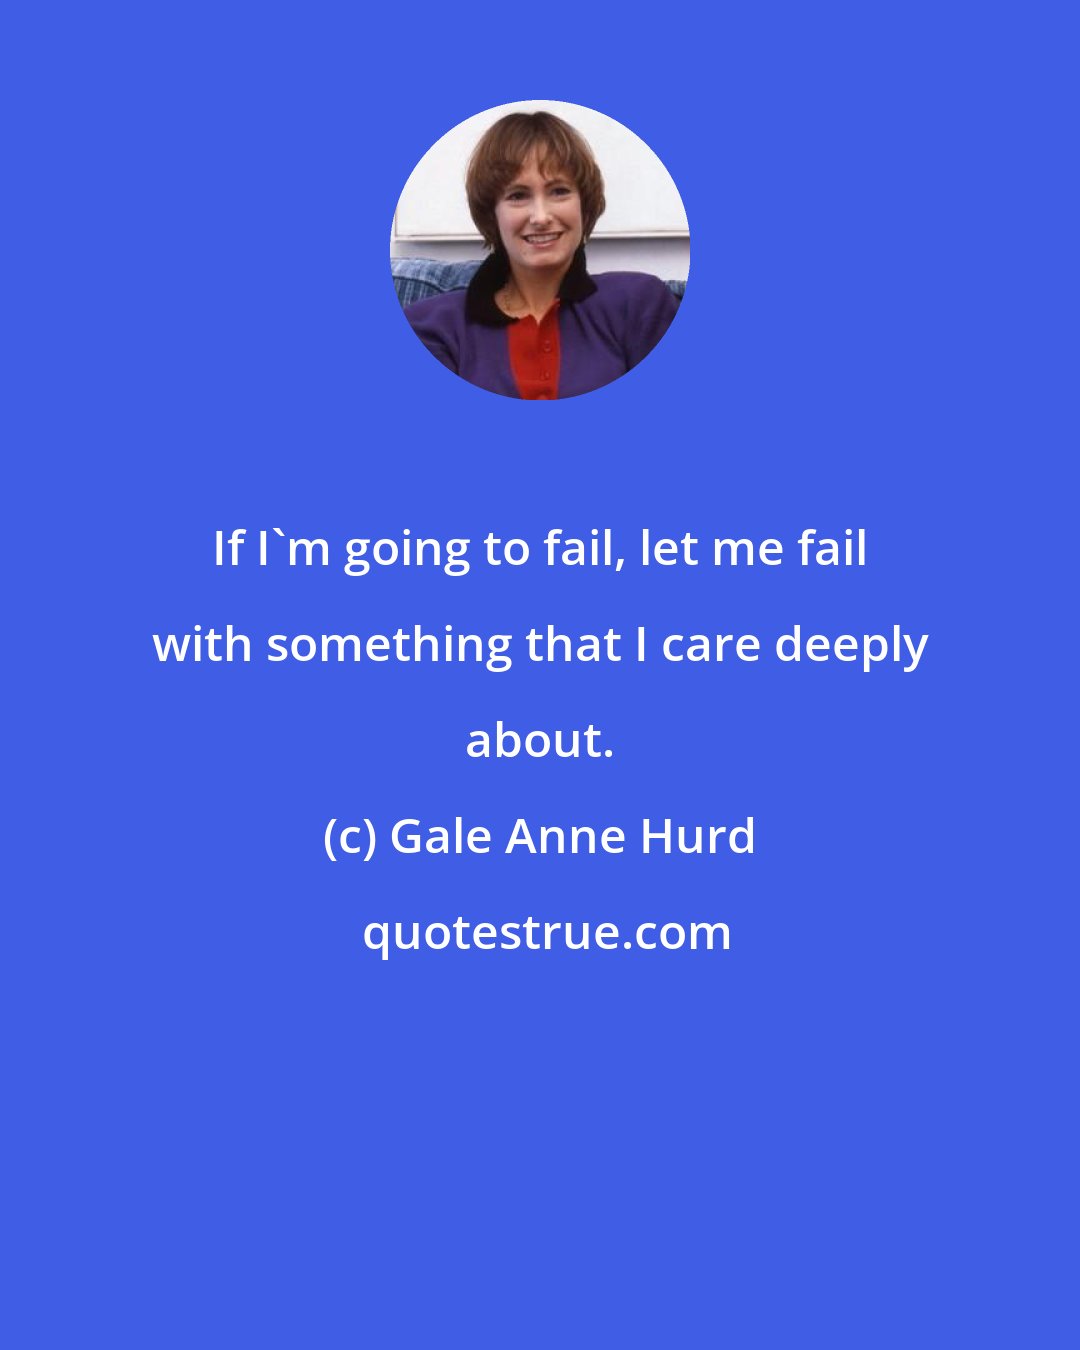 Gale Anne Hurd: If I'm going to fail, let me fail with something that I care deeply about.